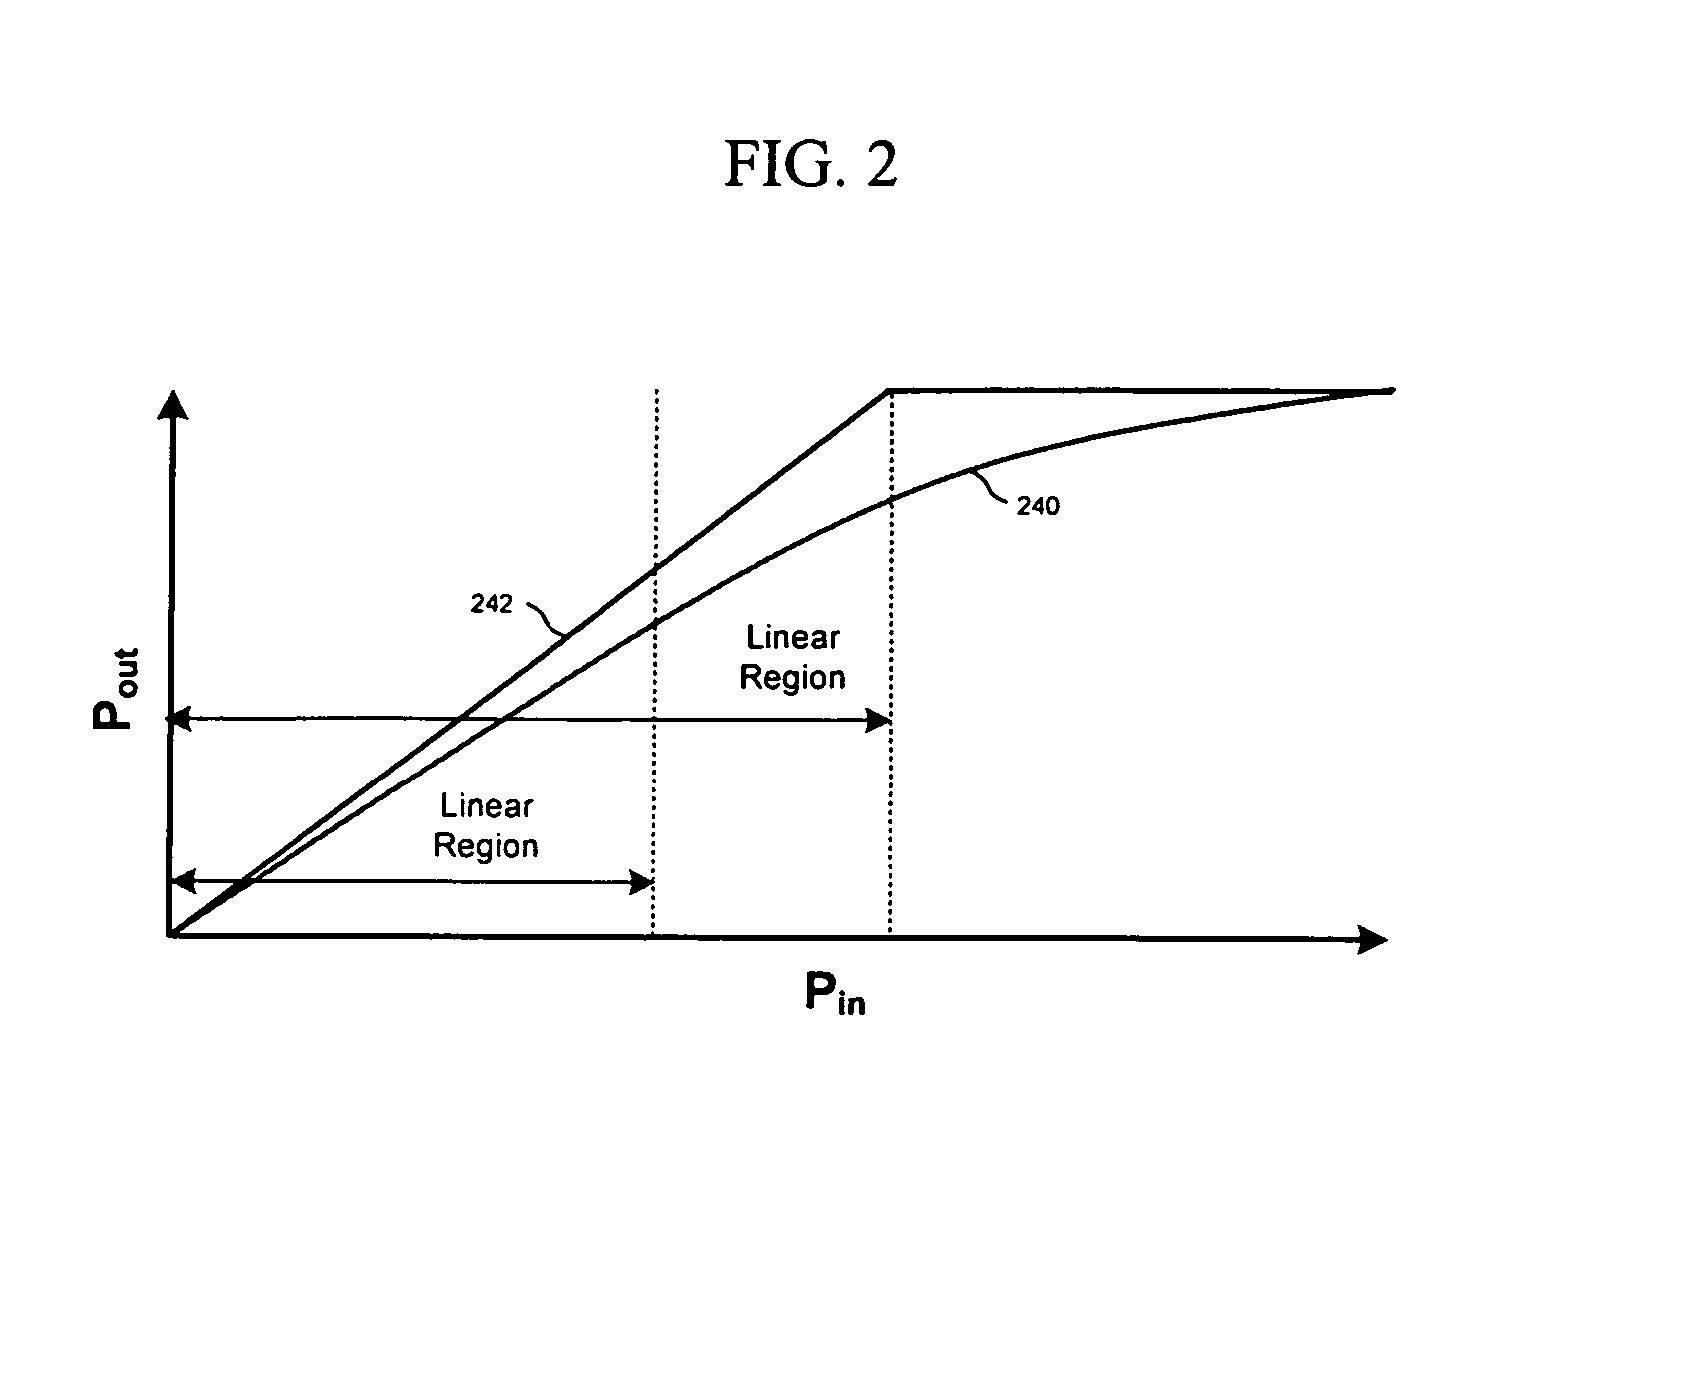 Method and apparatus for adaptively controlling signals